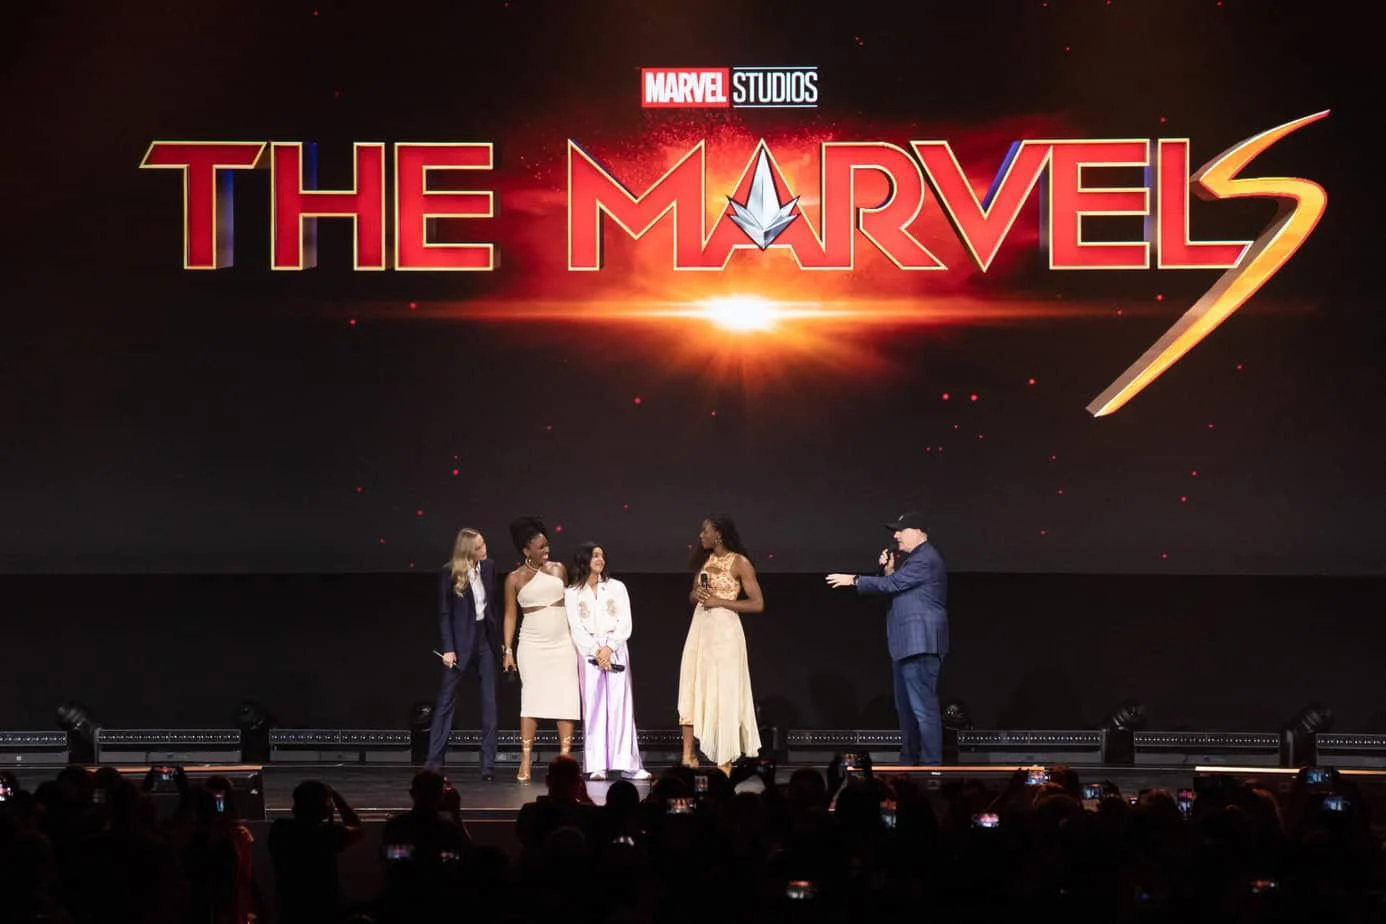 The cast of The Marvels on stage during the Marvel Studios panel at D23 Expo 2022.